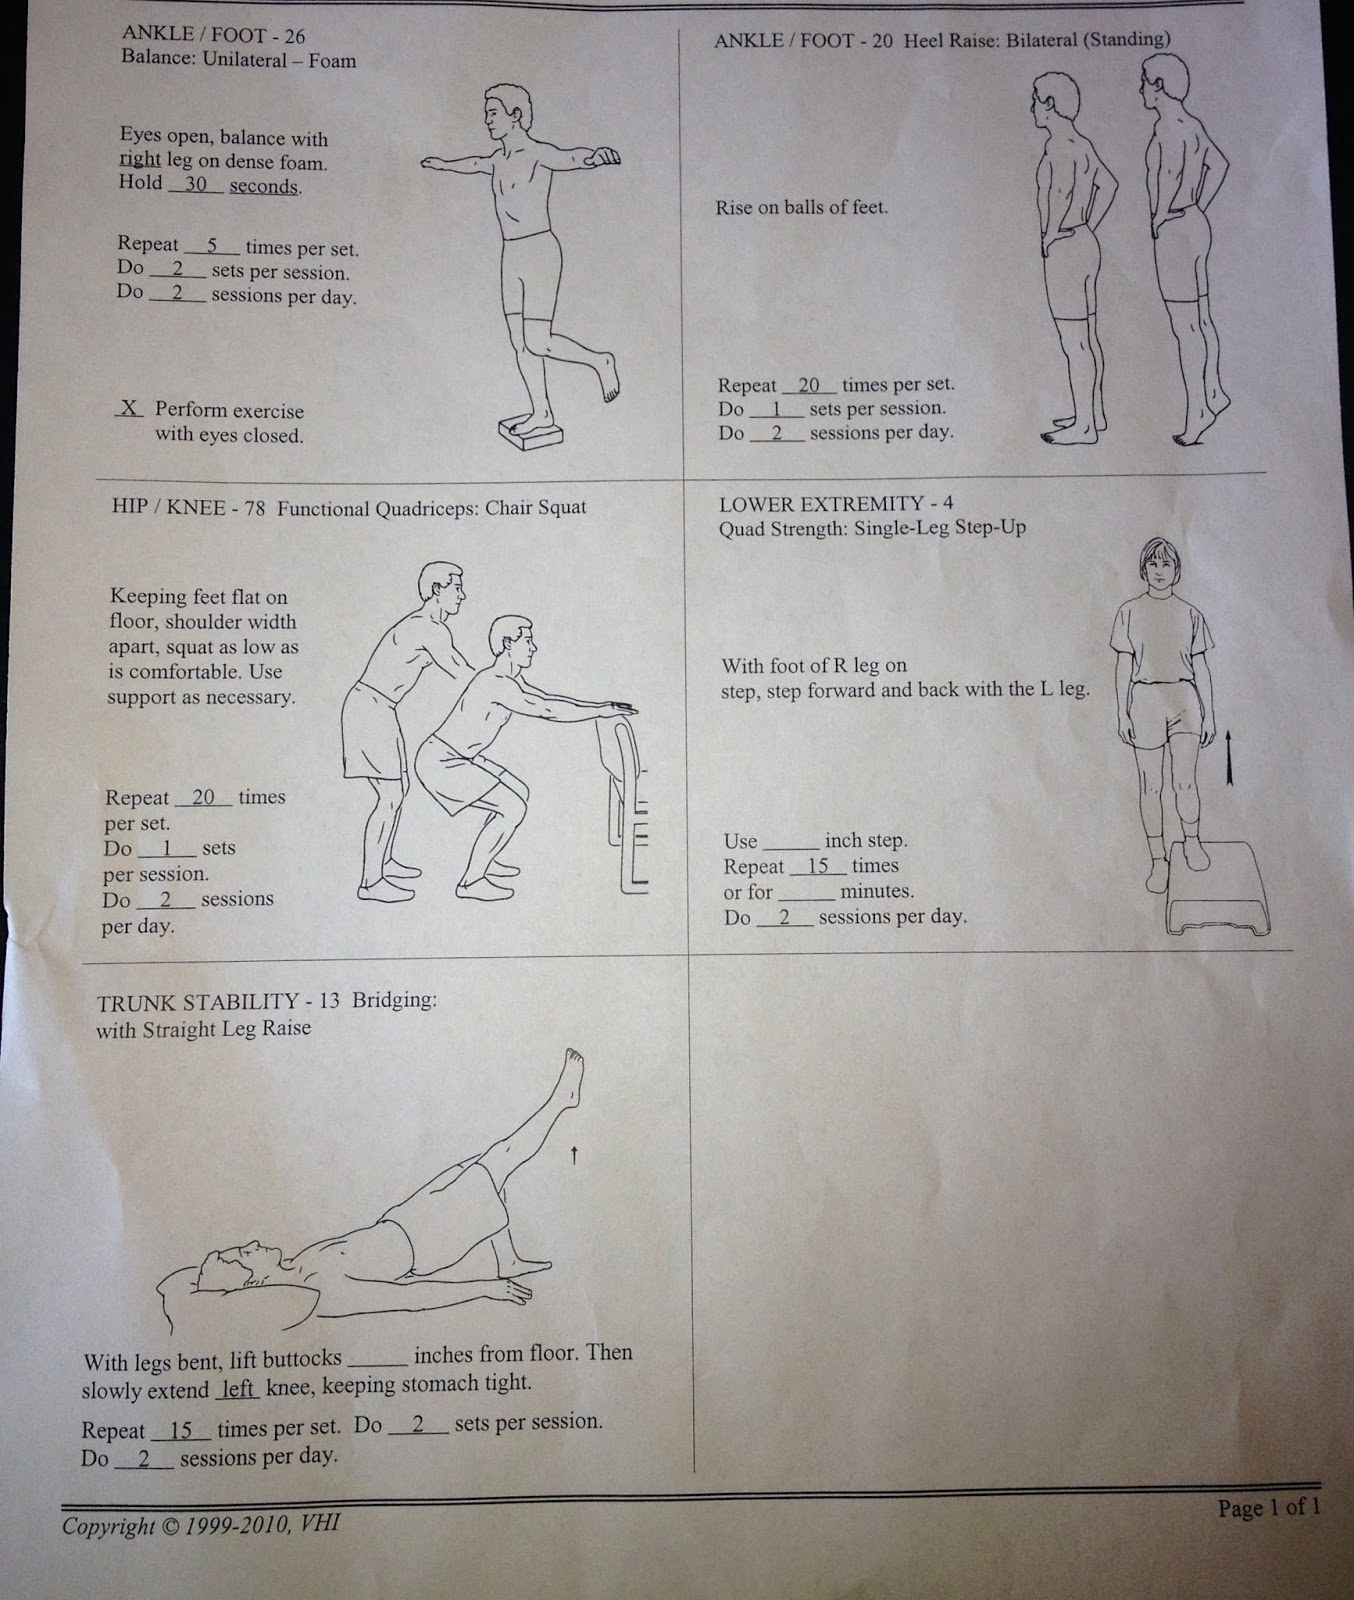 Post lisfranc surgery physical therapy land exercises, next stage ...